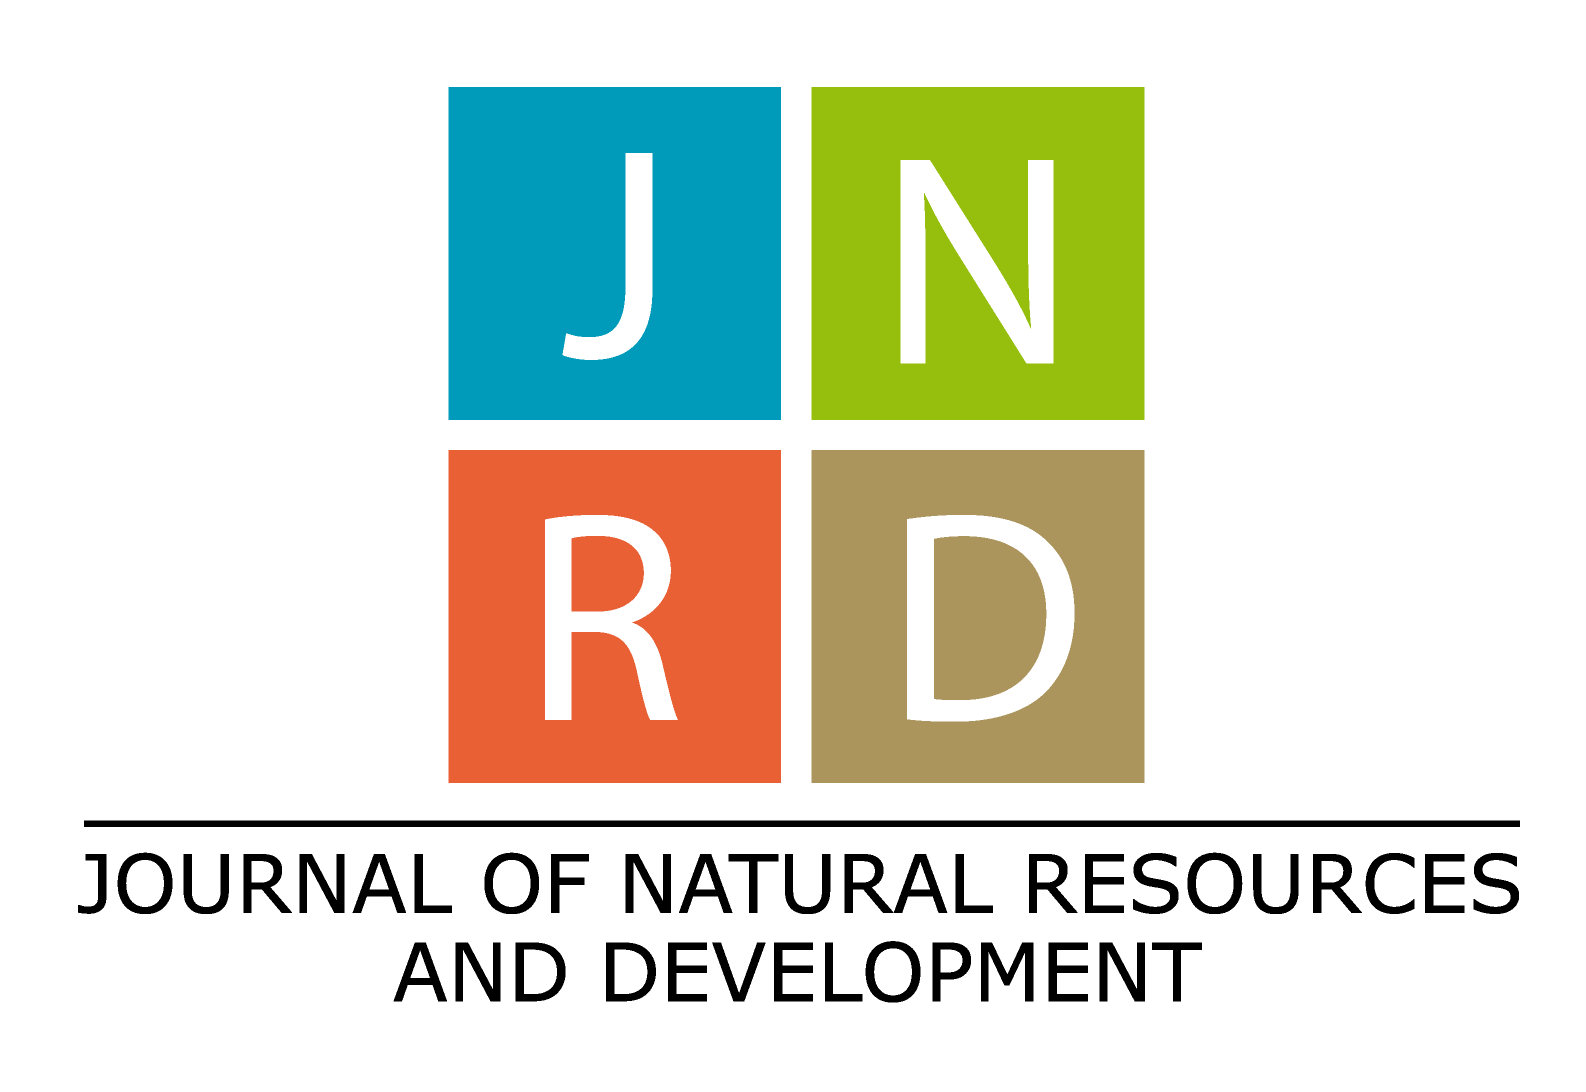 JNRD - Journal of Natural Resources and Development